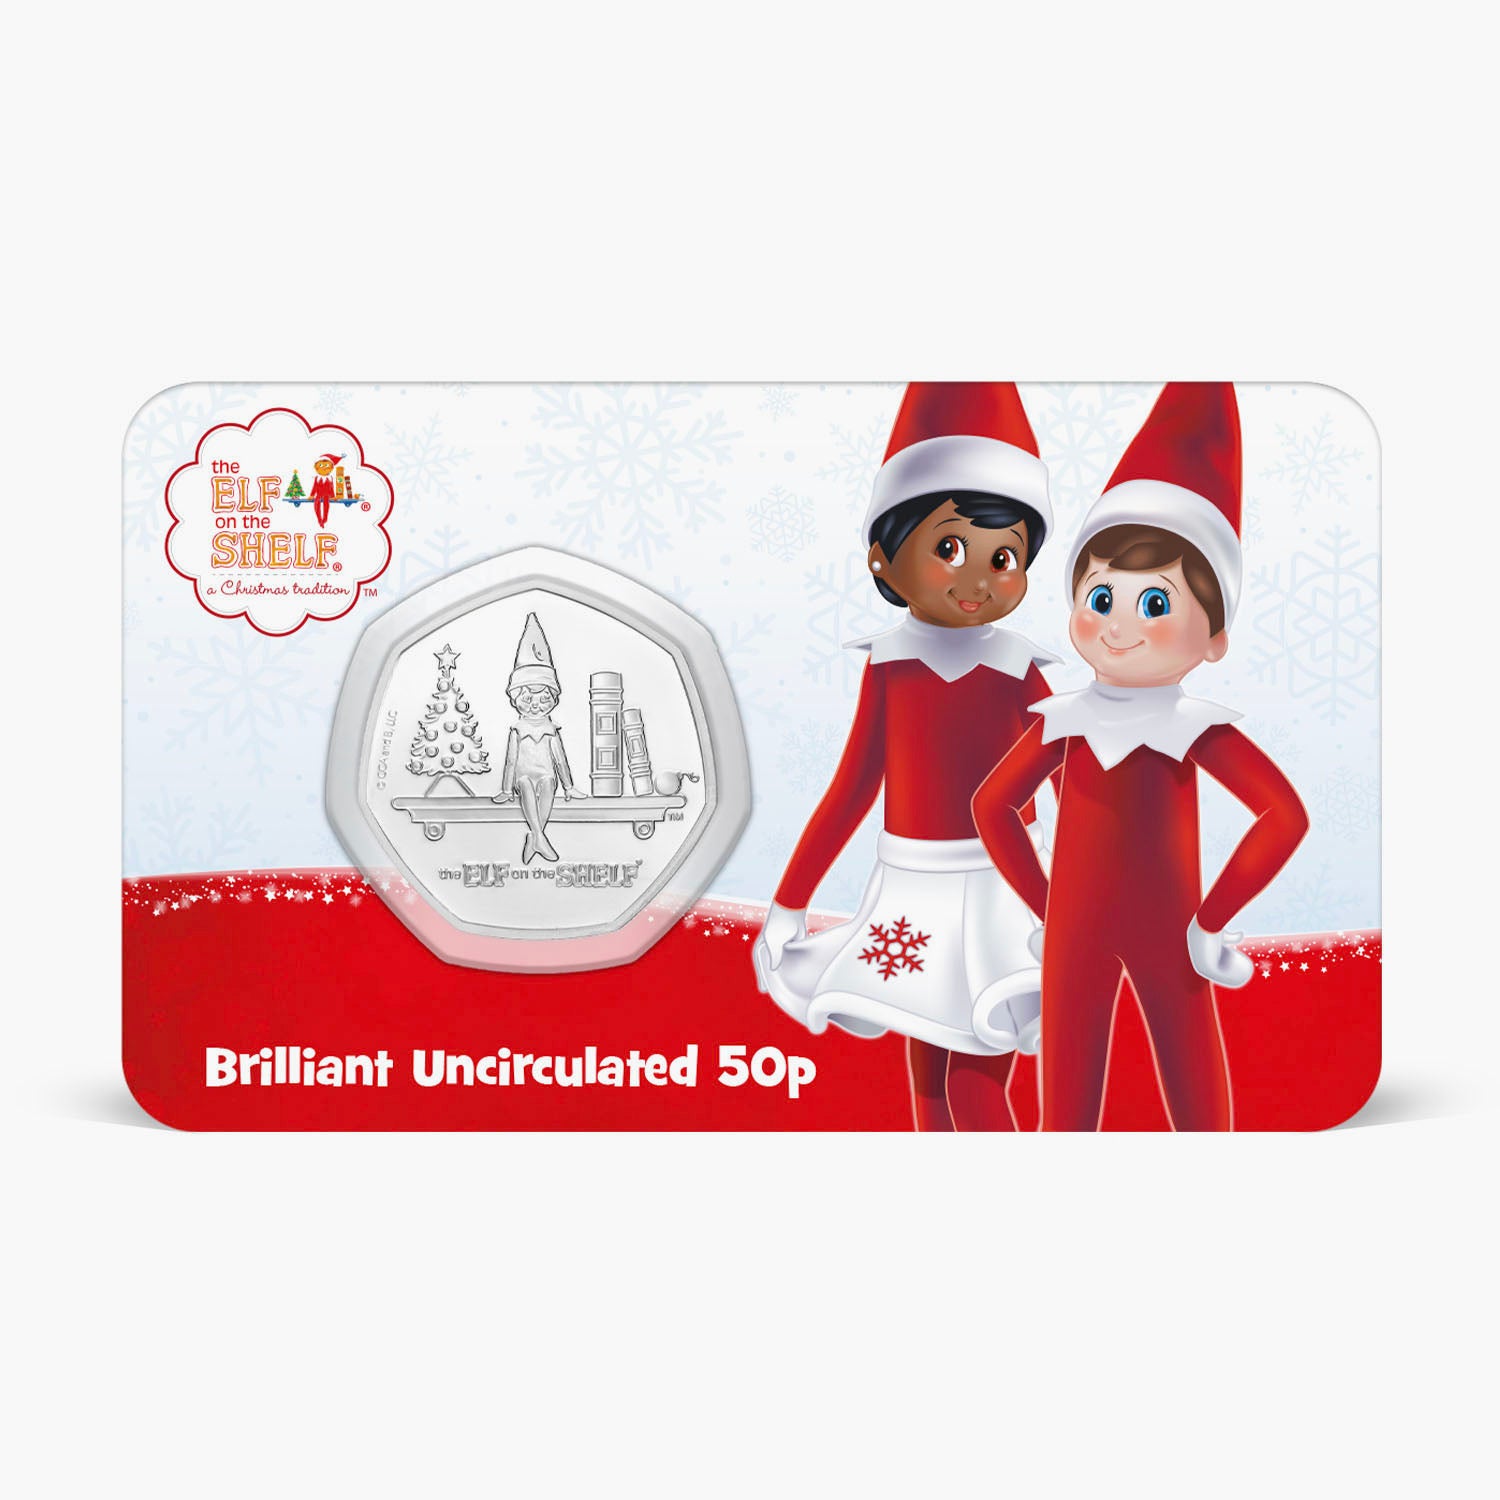 The Official Elf on the Shelf 2022 BU 50p Coin